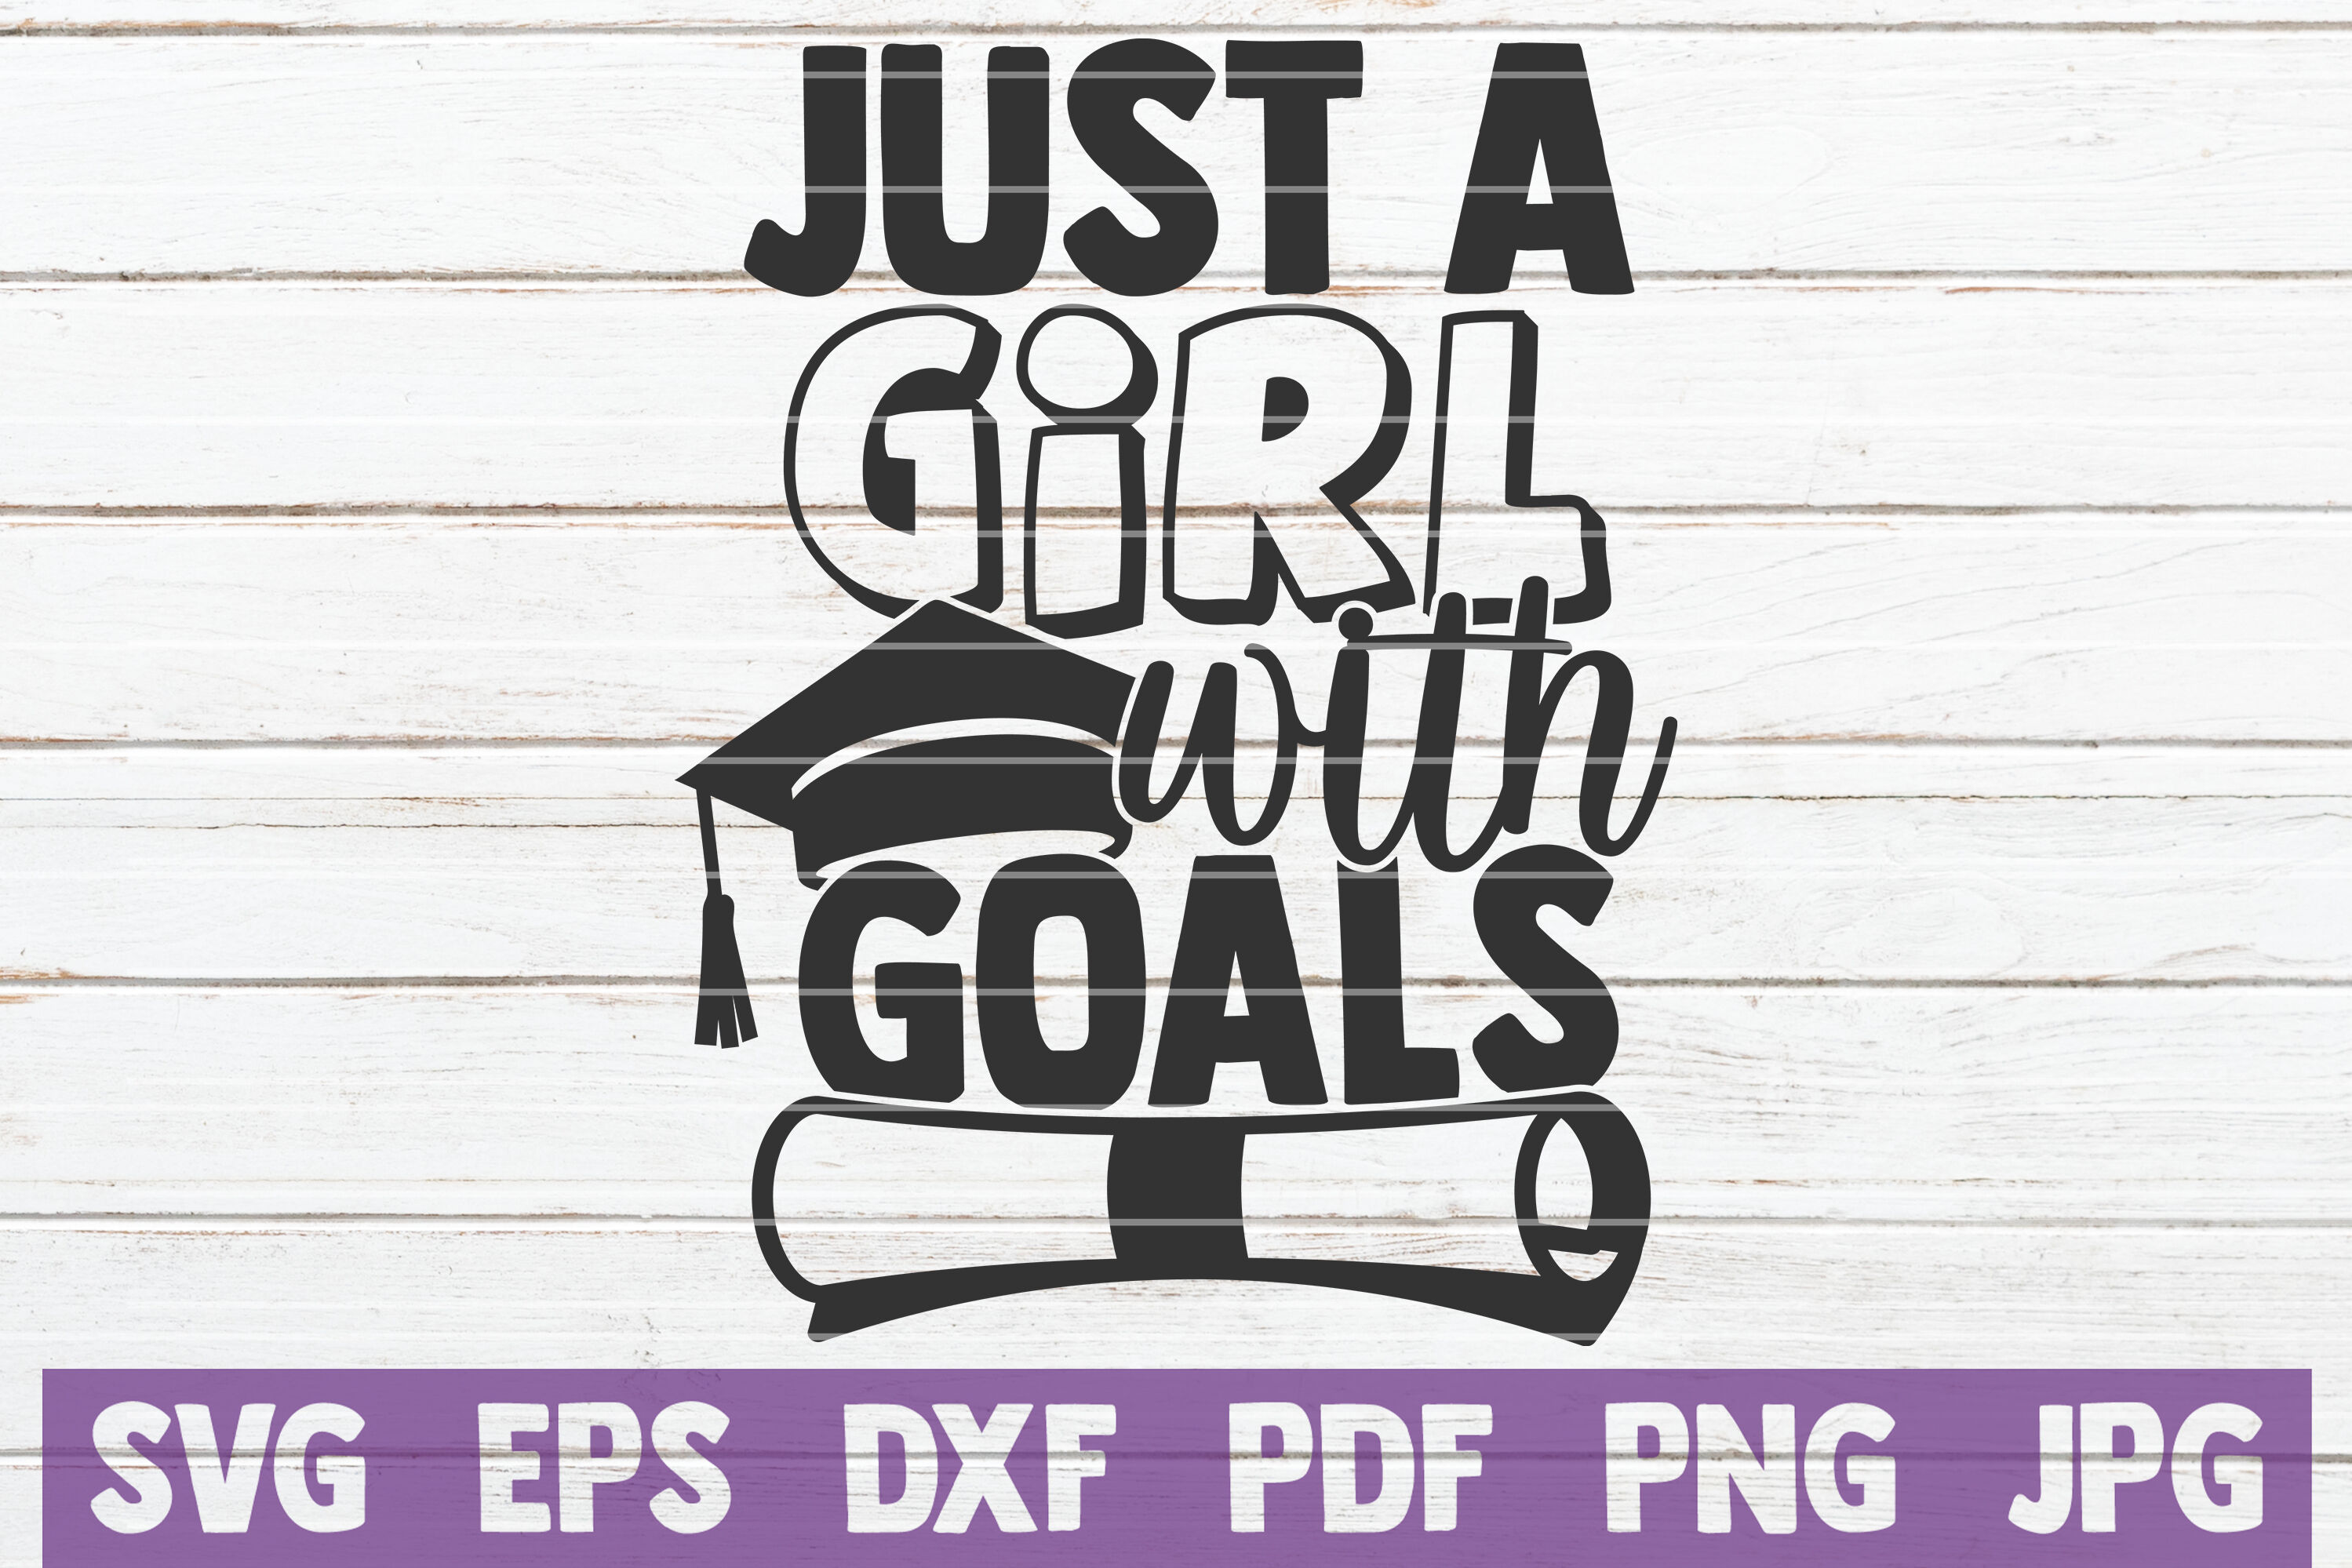 Just A Girl With Goals Svg Cut File By Mintymarshmallows Thehungryjpeg Com